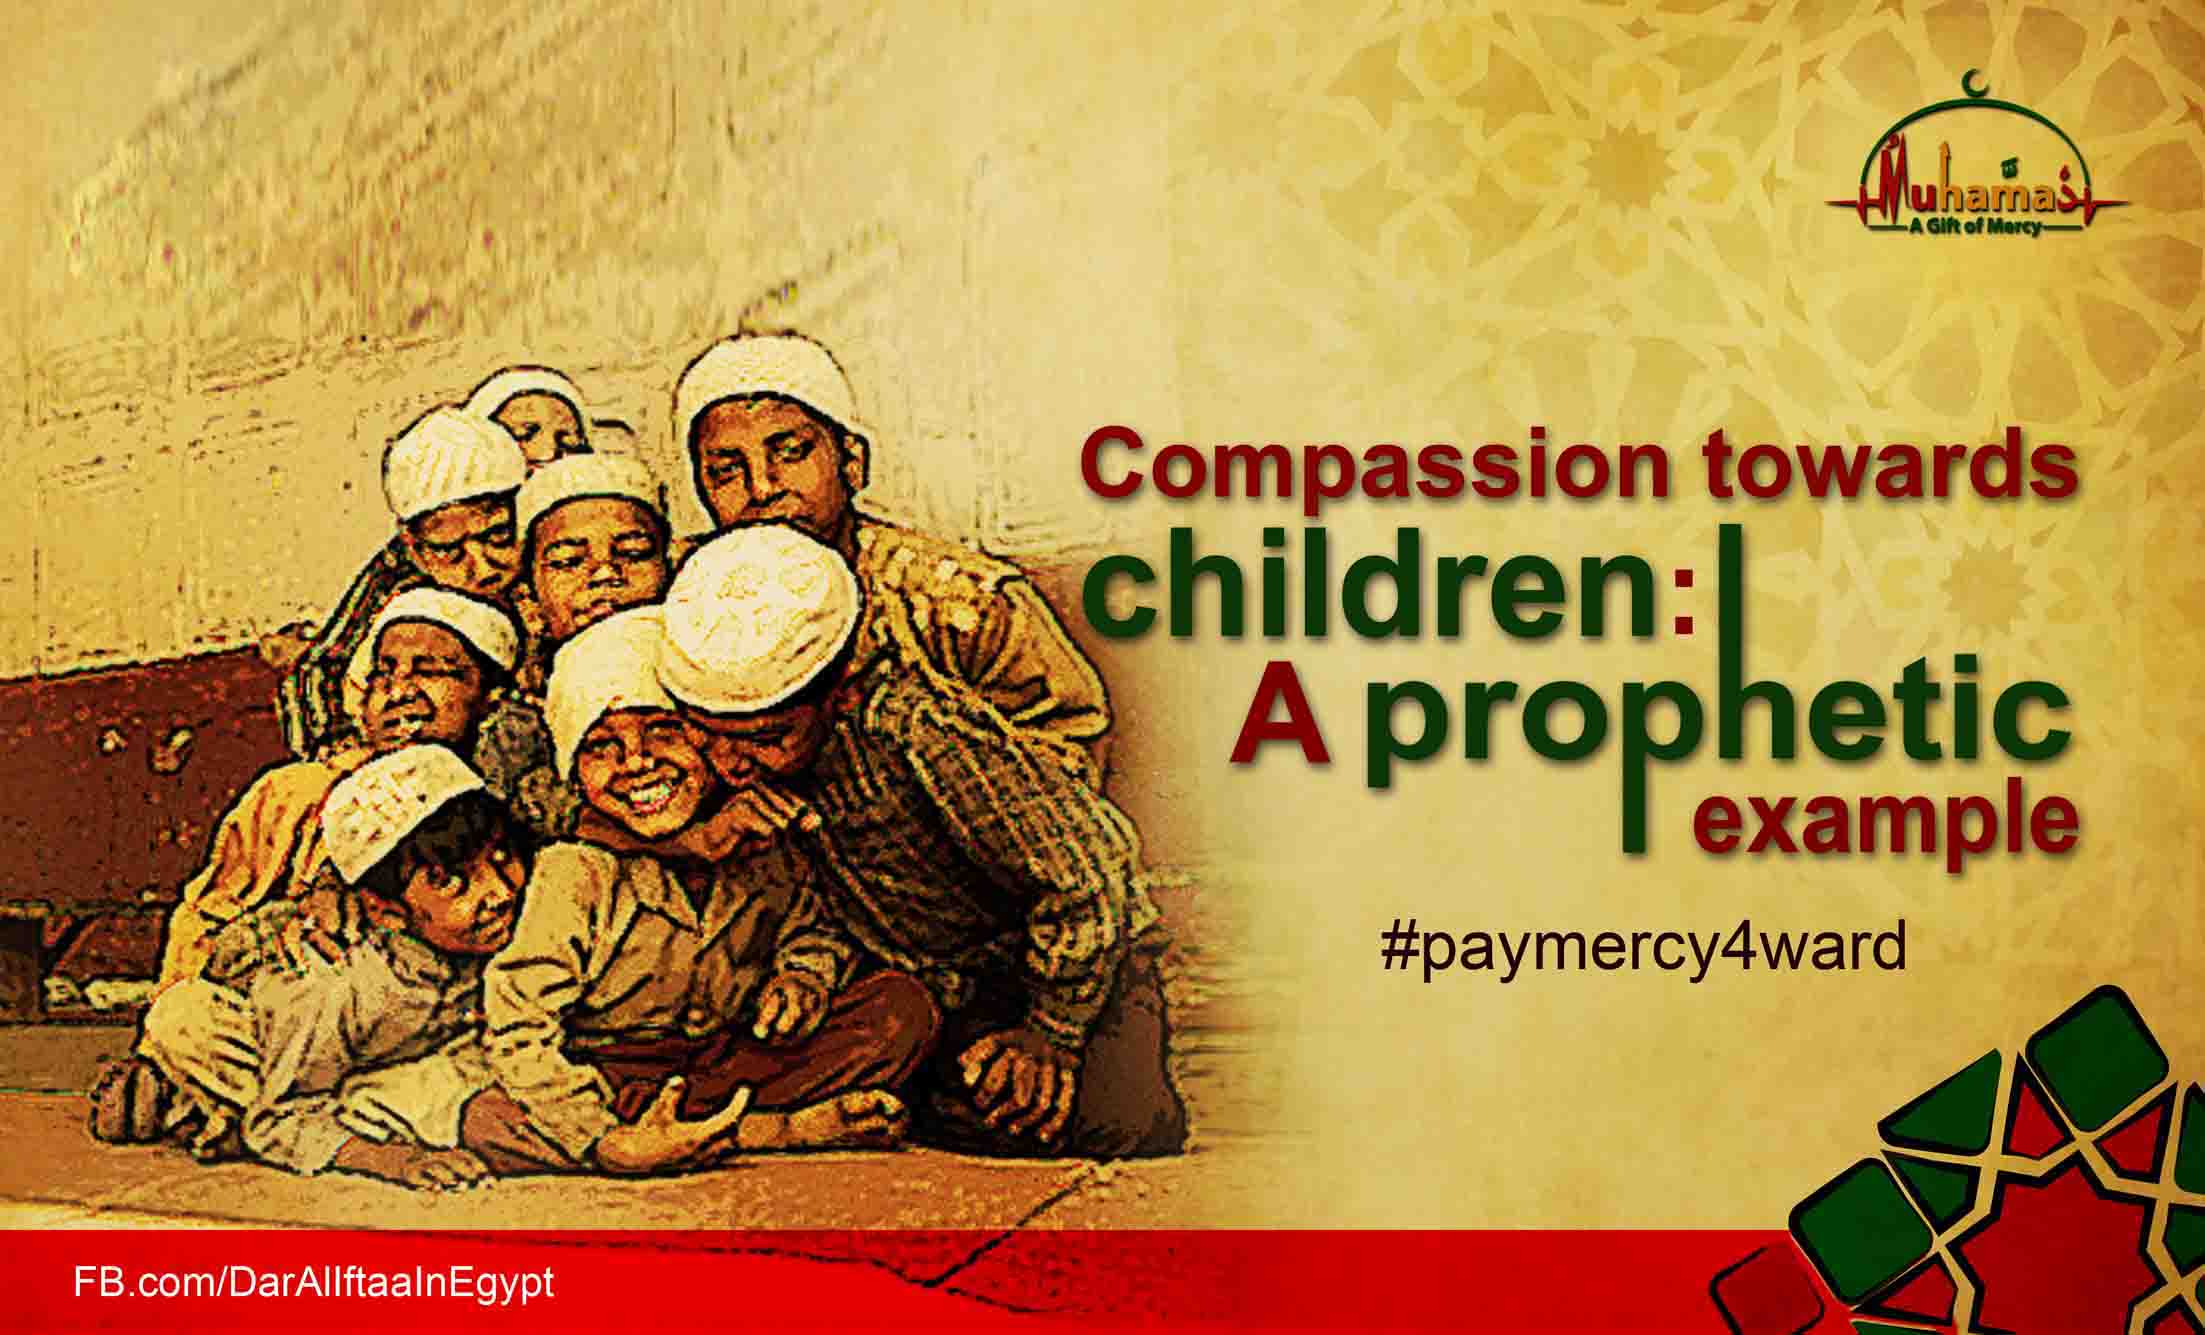 How did Prophet Muhammad set an example in dealing with children?